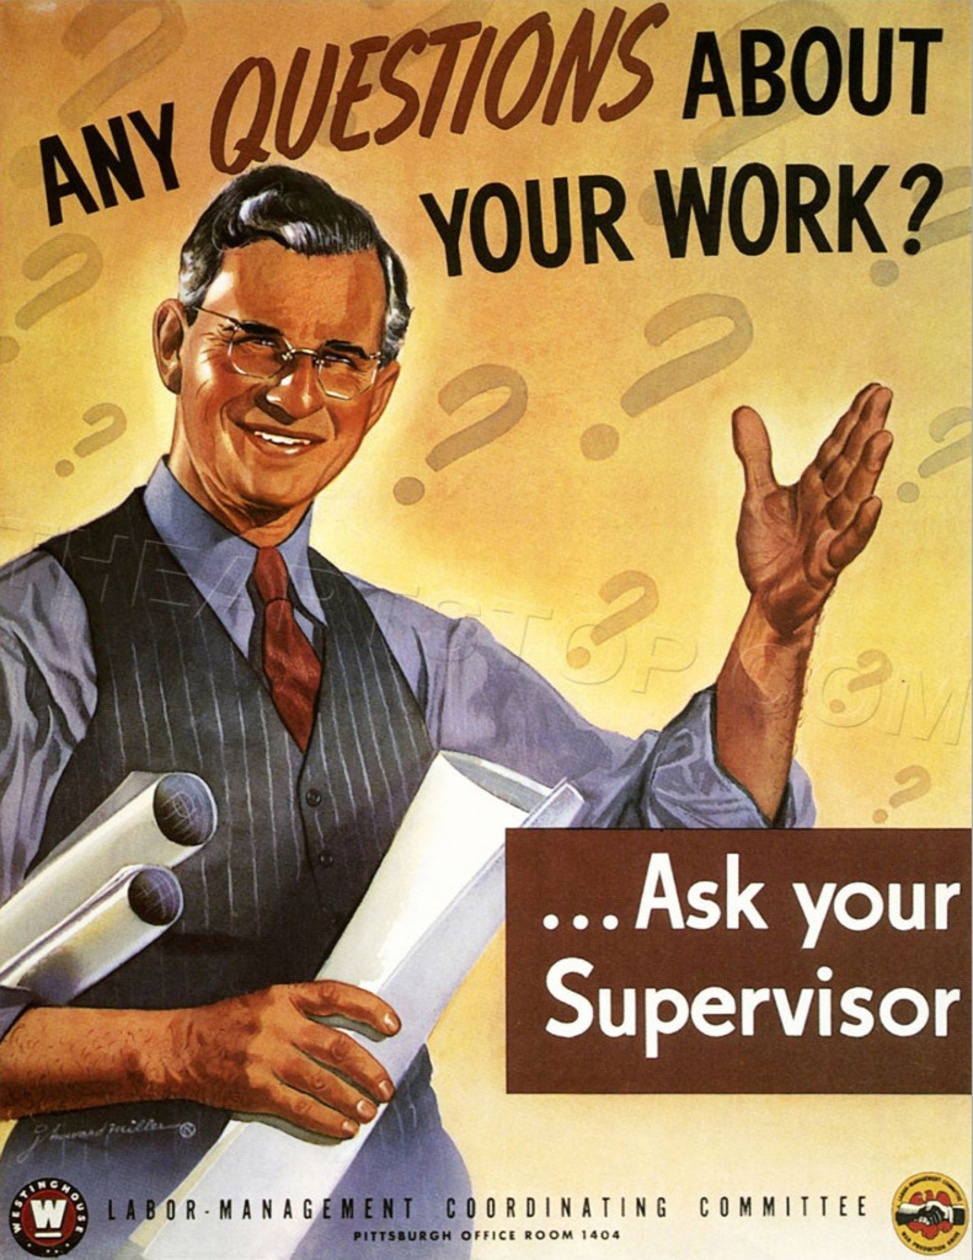 Any Questions About Your Work? … Ask your Supervisor.